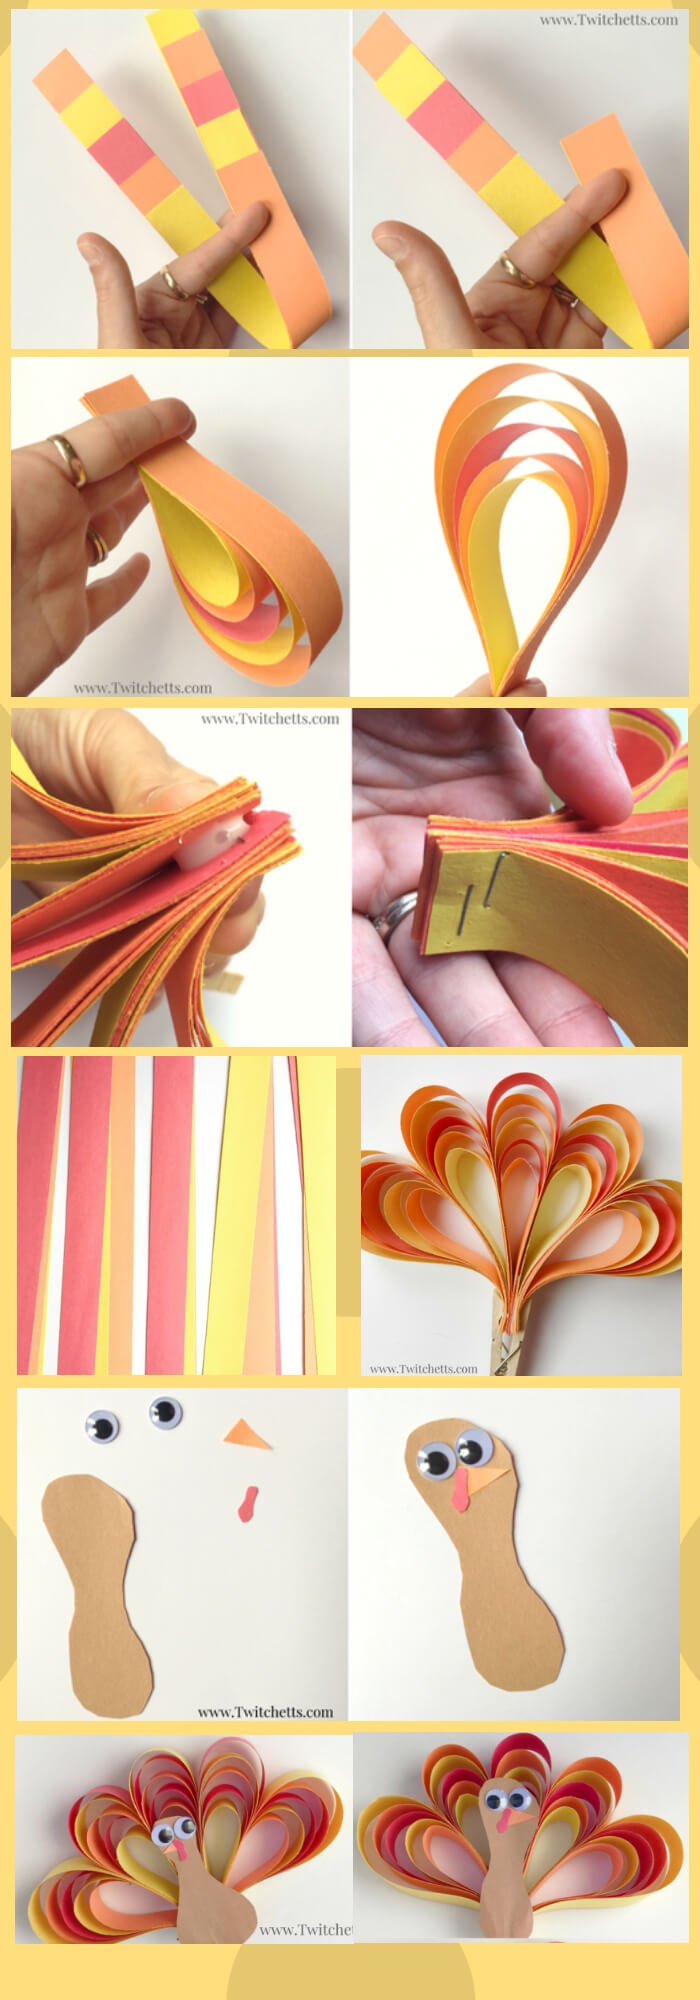 3D construction paper turkey craft | Simple Ideas for Kids' Crafts for Thanksgiving - FarmFoodFamily.com